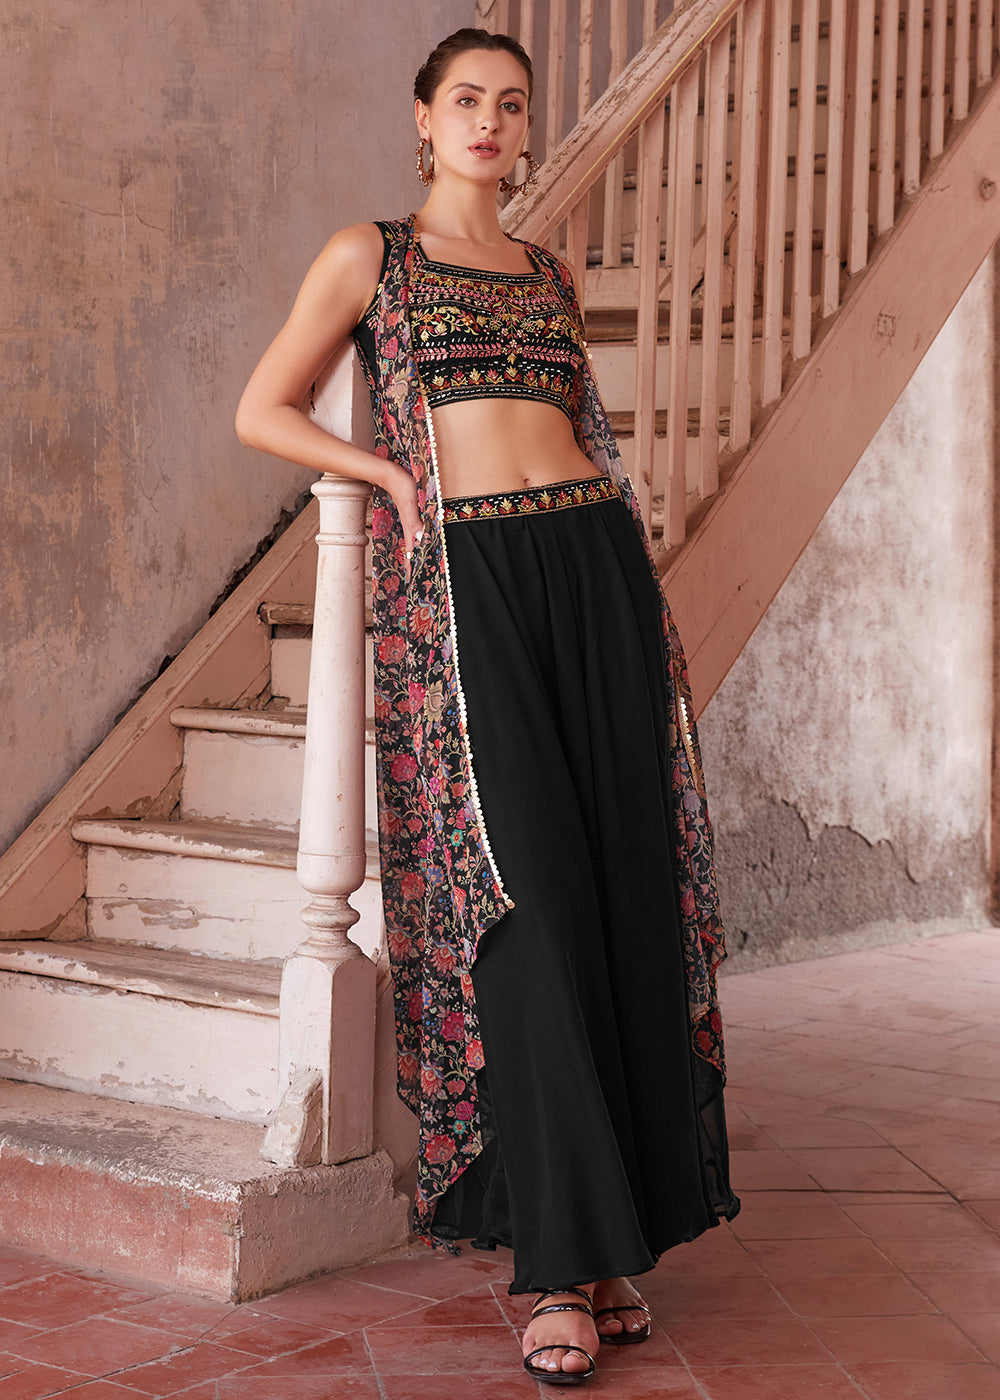 Shop Now Stunning Black Designer Crop Top Style Sharara Suit Online at Empress Clothing in USA, UK, Canada, Italy & Worldwide. 